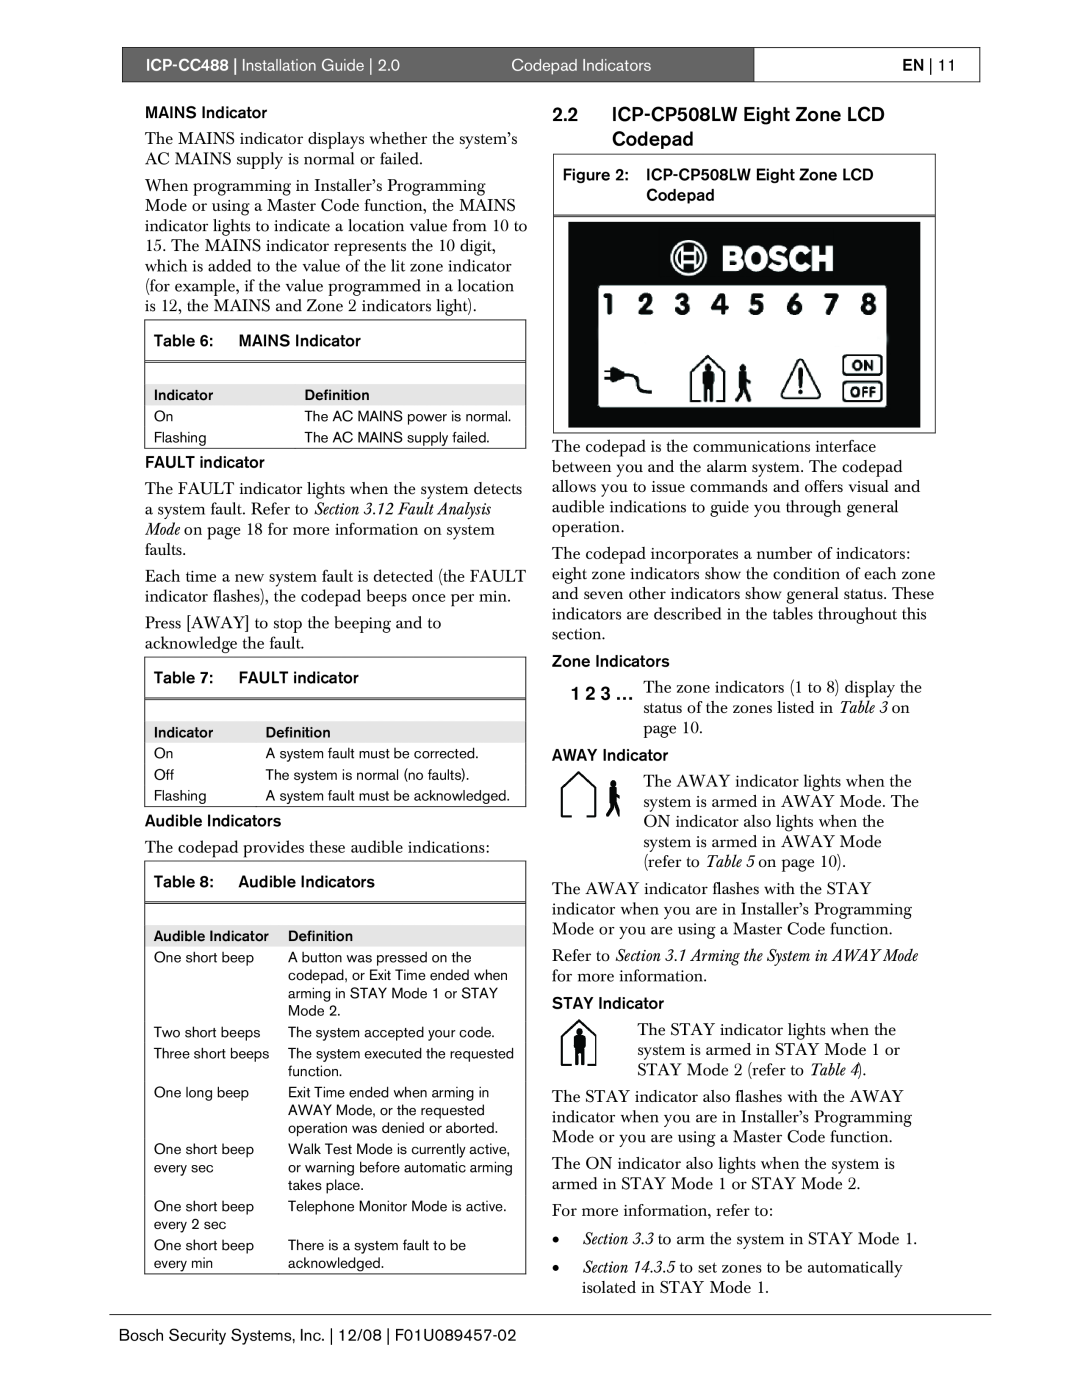 Bosch Appliances manual 2.2ICP-CP508LWEight Zone LCD Codepad, ICP-CC488| Installation Guide, Codepad Indicators 